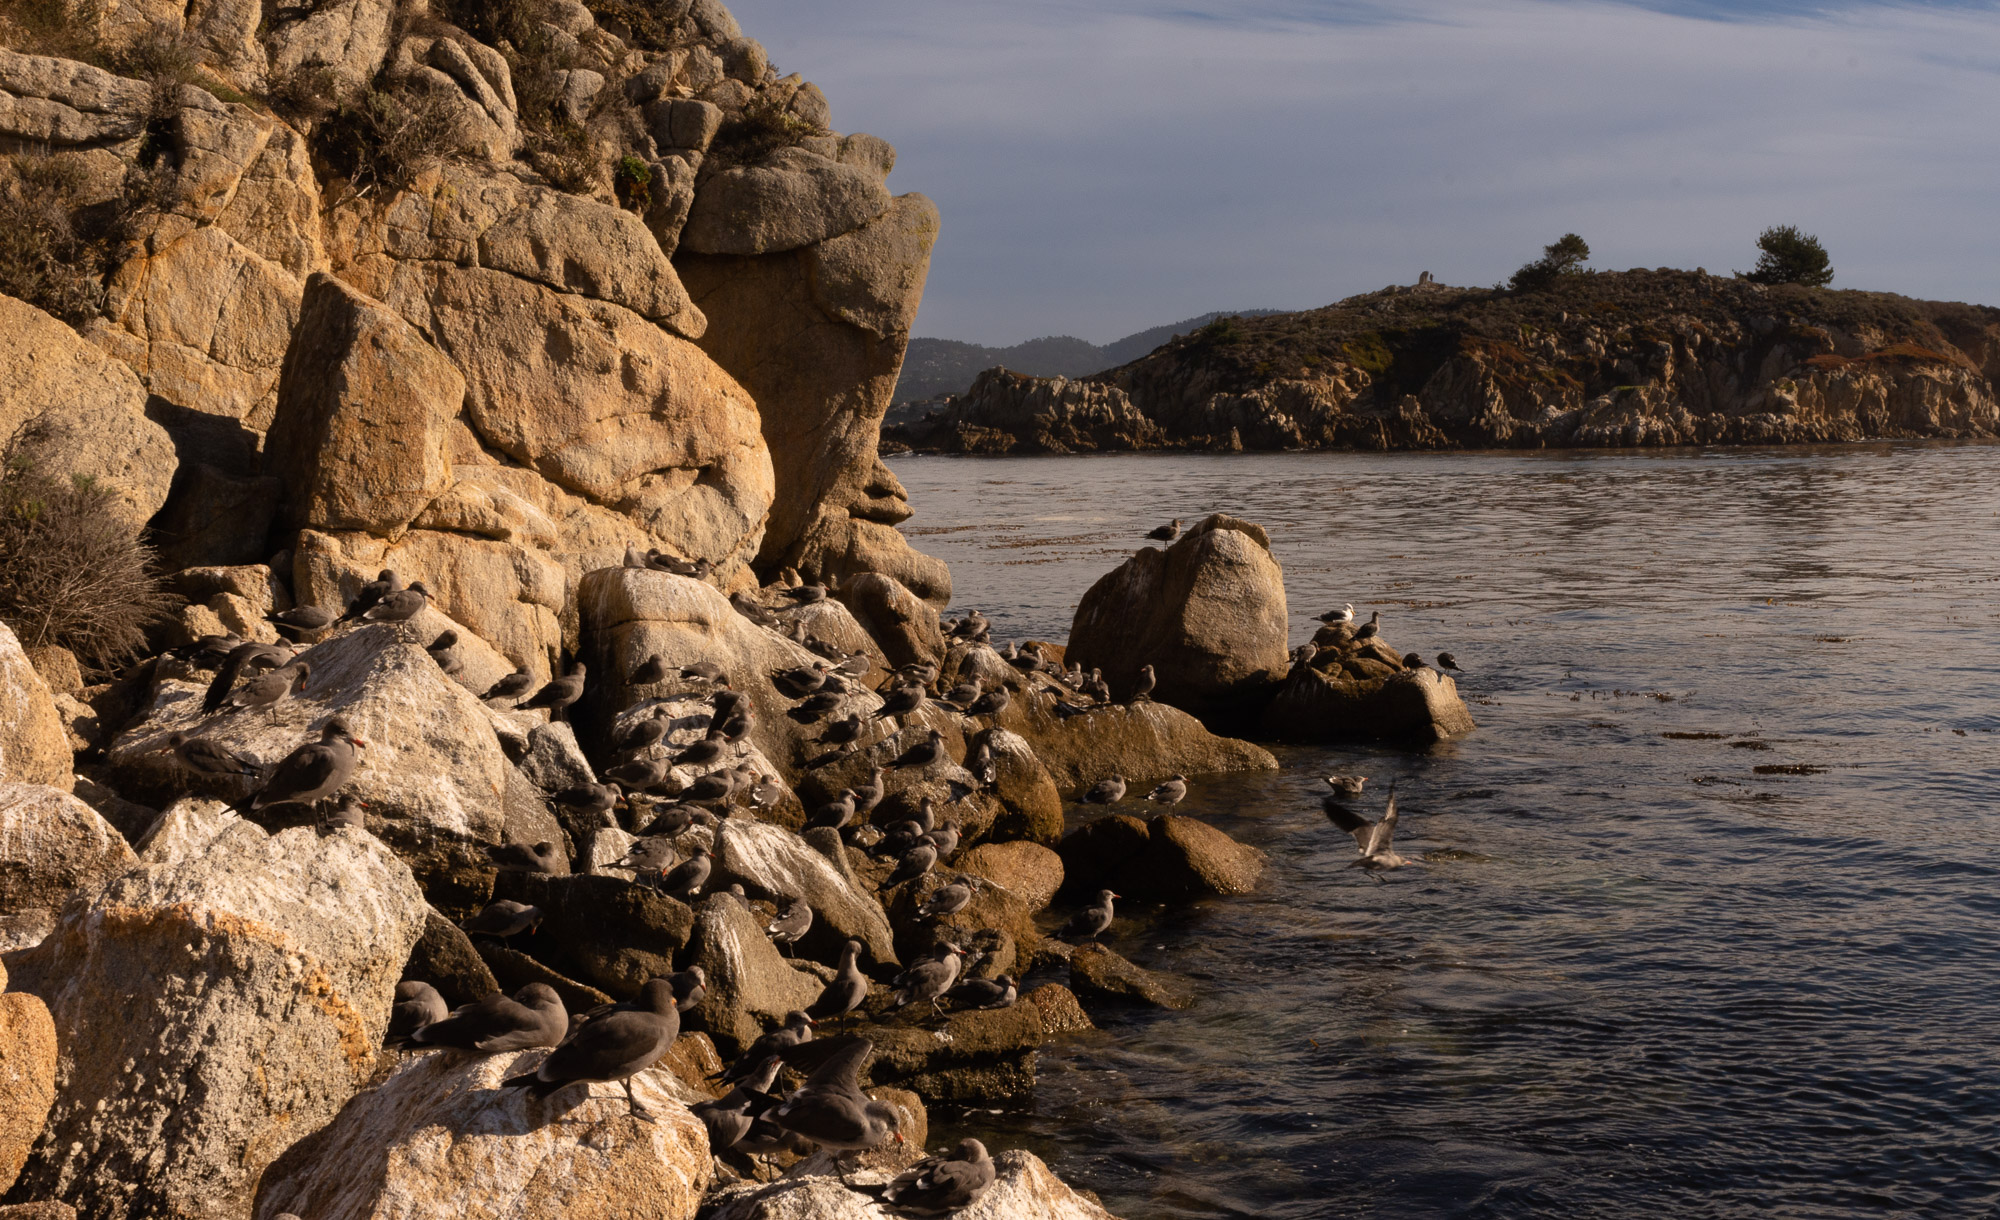 Guano, and shorebirds, are everywhere at Point Lobos